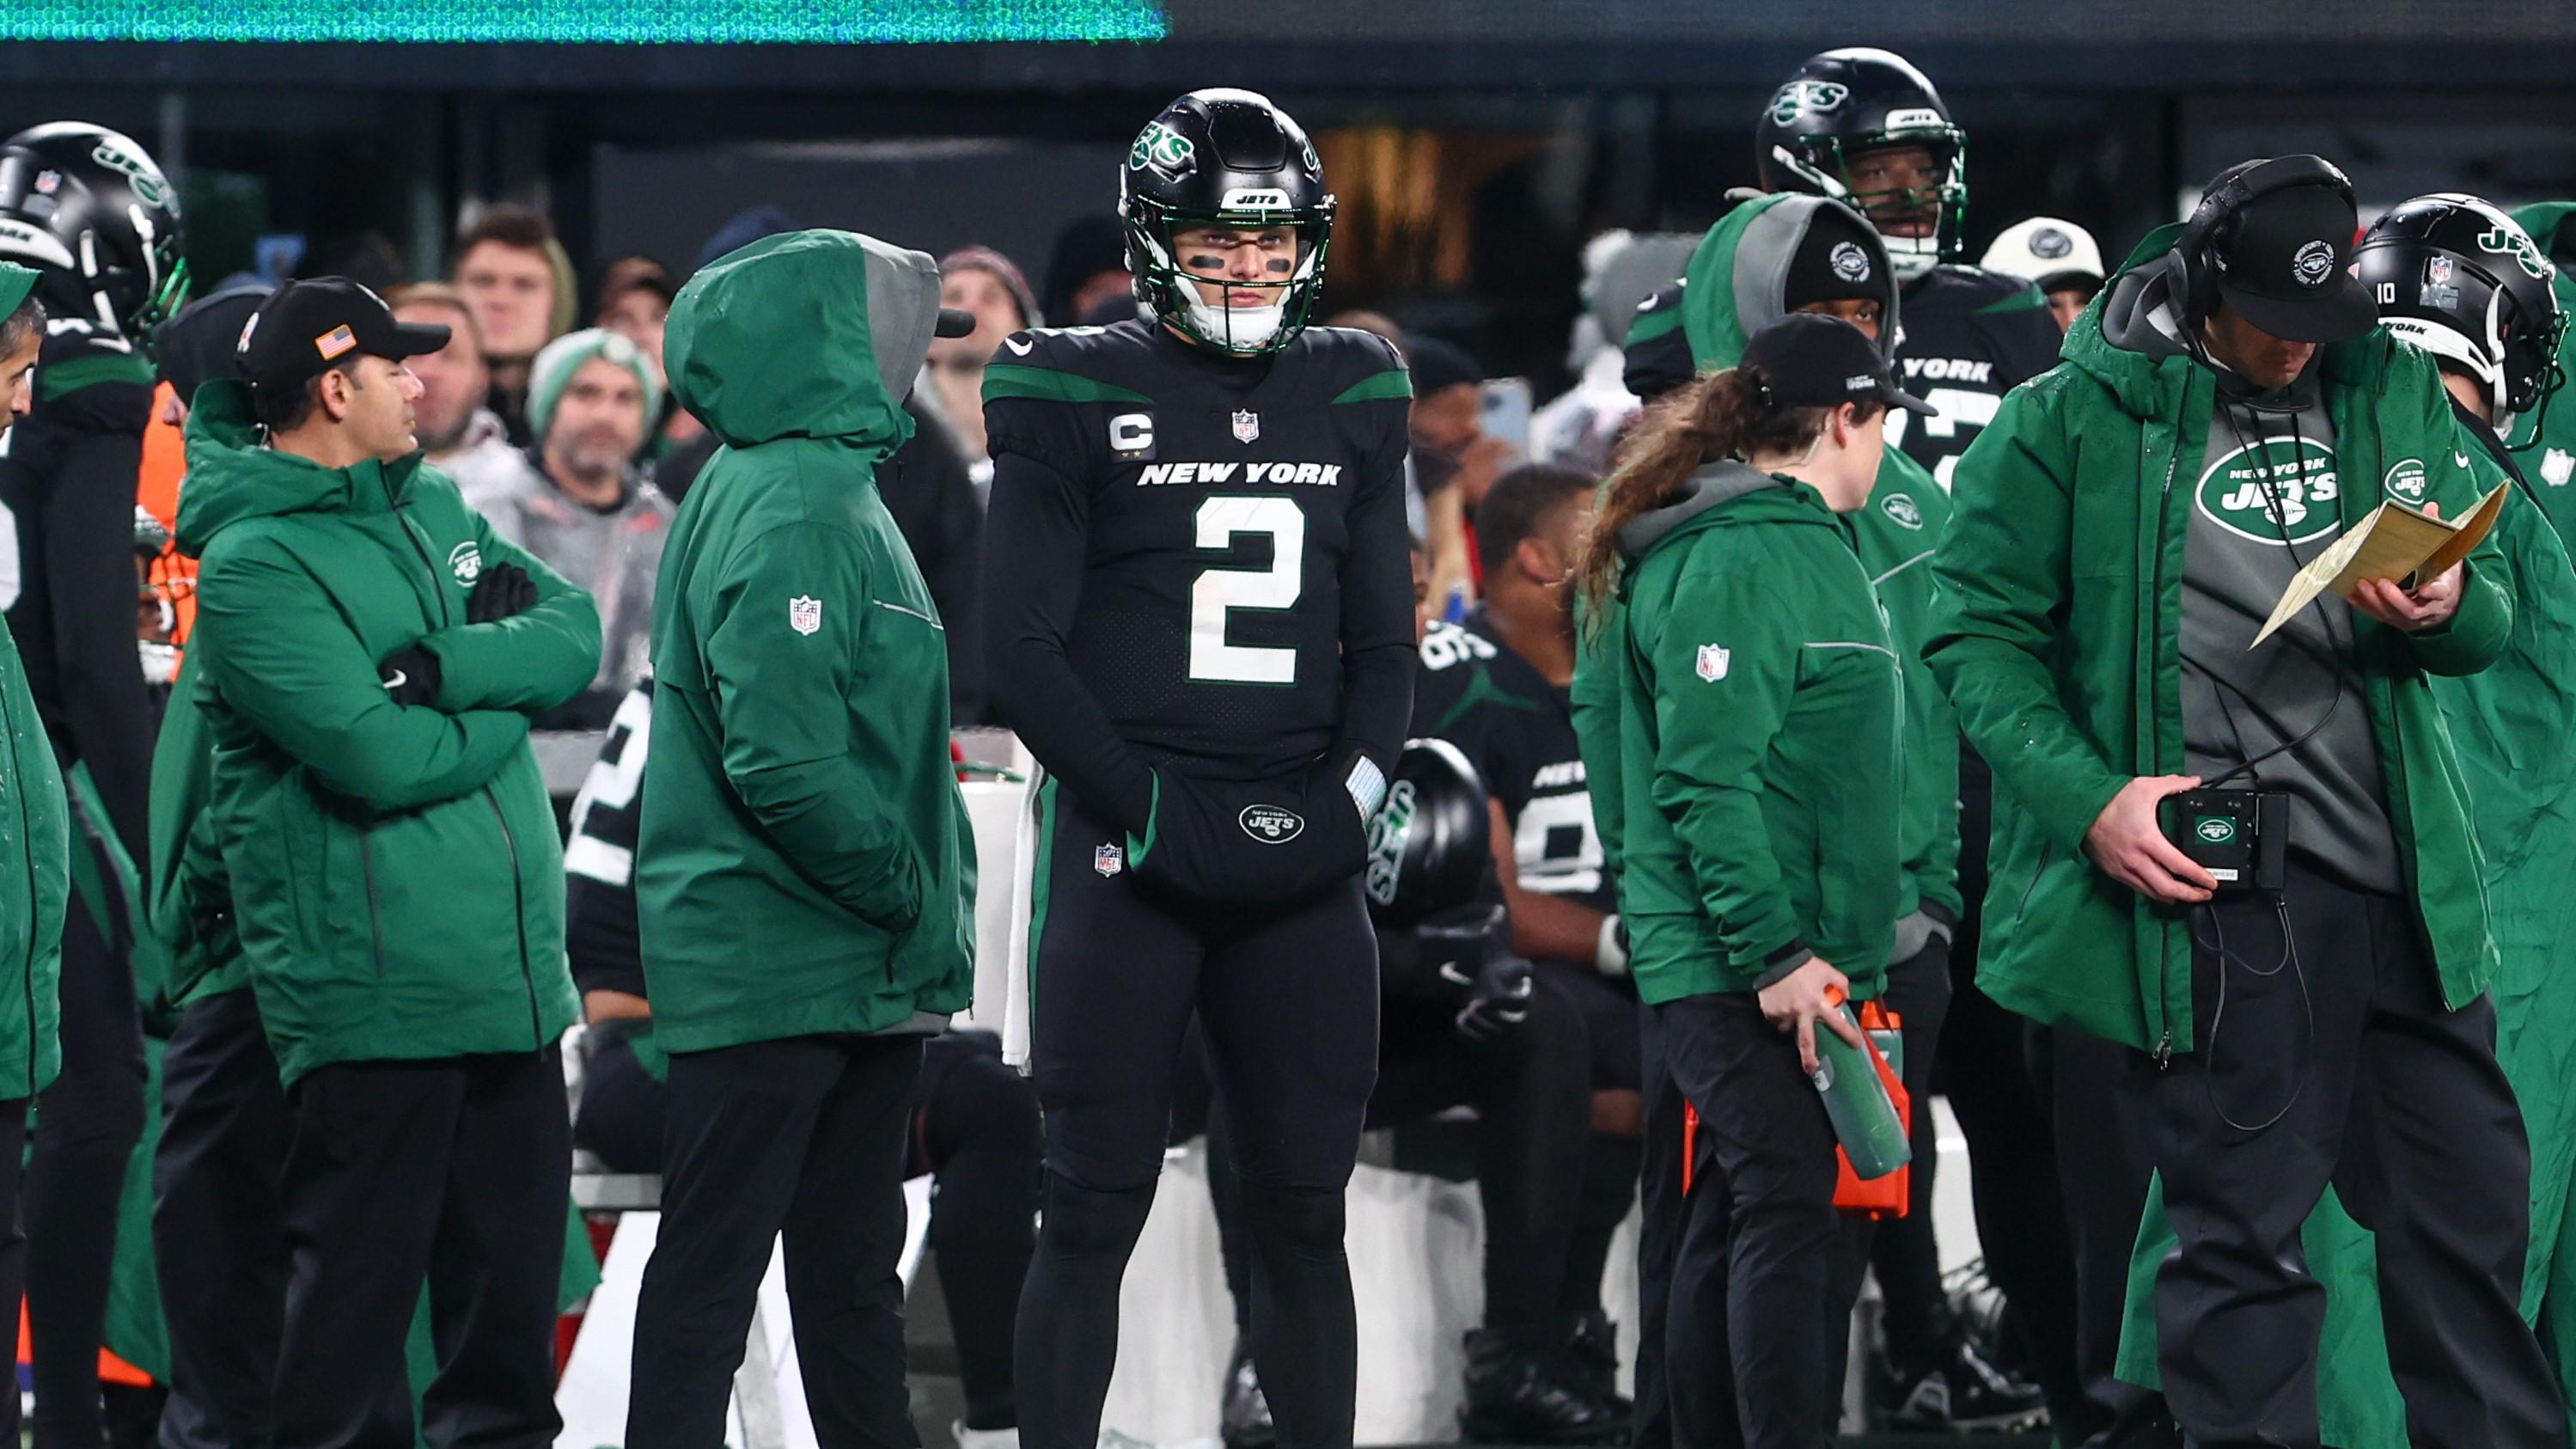 Dec 22, 2022; East Rutherford, New Jersey, USA; New York Jets quarterback Zach Wilson (2) watches from the sideline after being pulled from the game against the Jacksonville Jaguars during the second half at MetLife Stadium. Mandatory Credit: Ed Mulholland-USA TODAY Sports / © Ed Mulholland-USA TODAY Sports